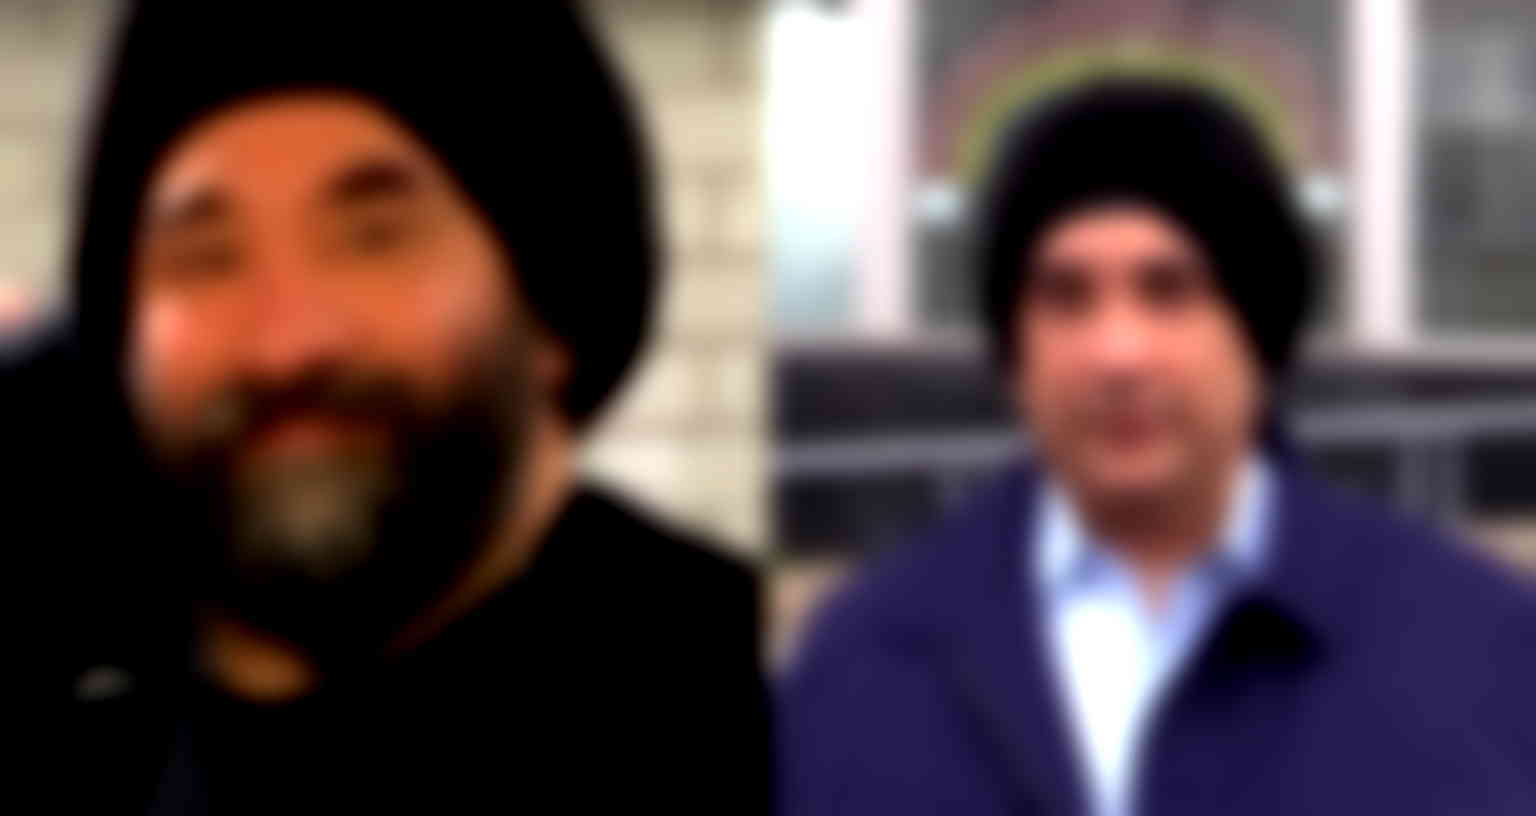 Sikh Doctor Brothers Shave Their Beards to Safely Treat Coronavirus Patients